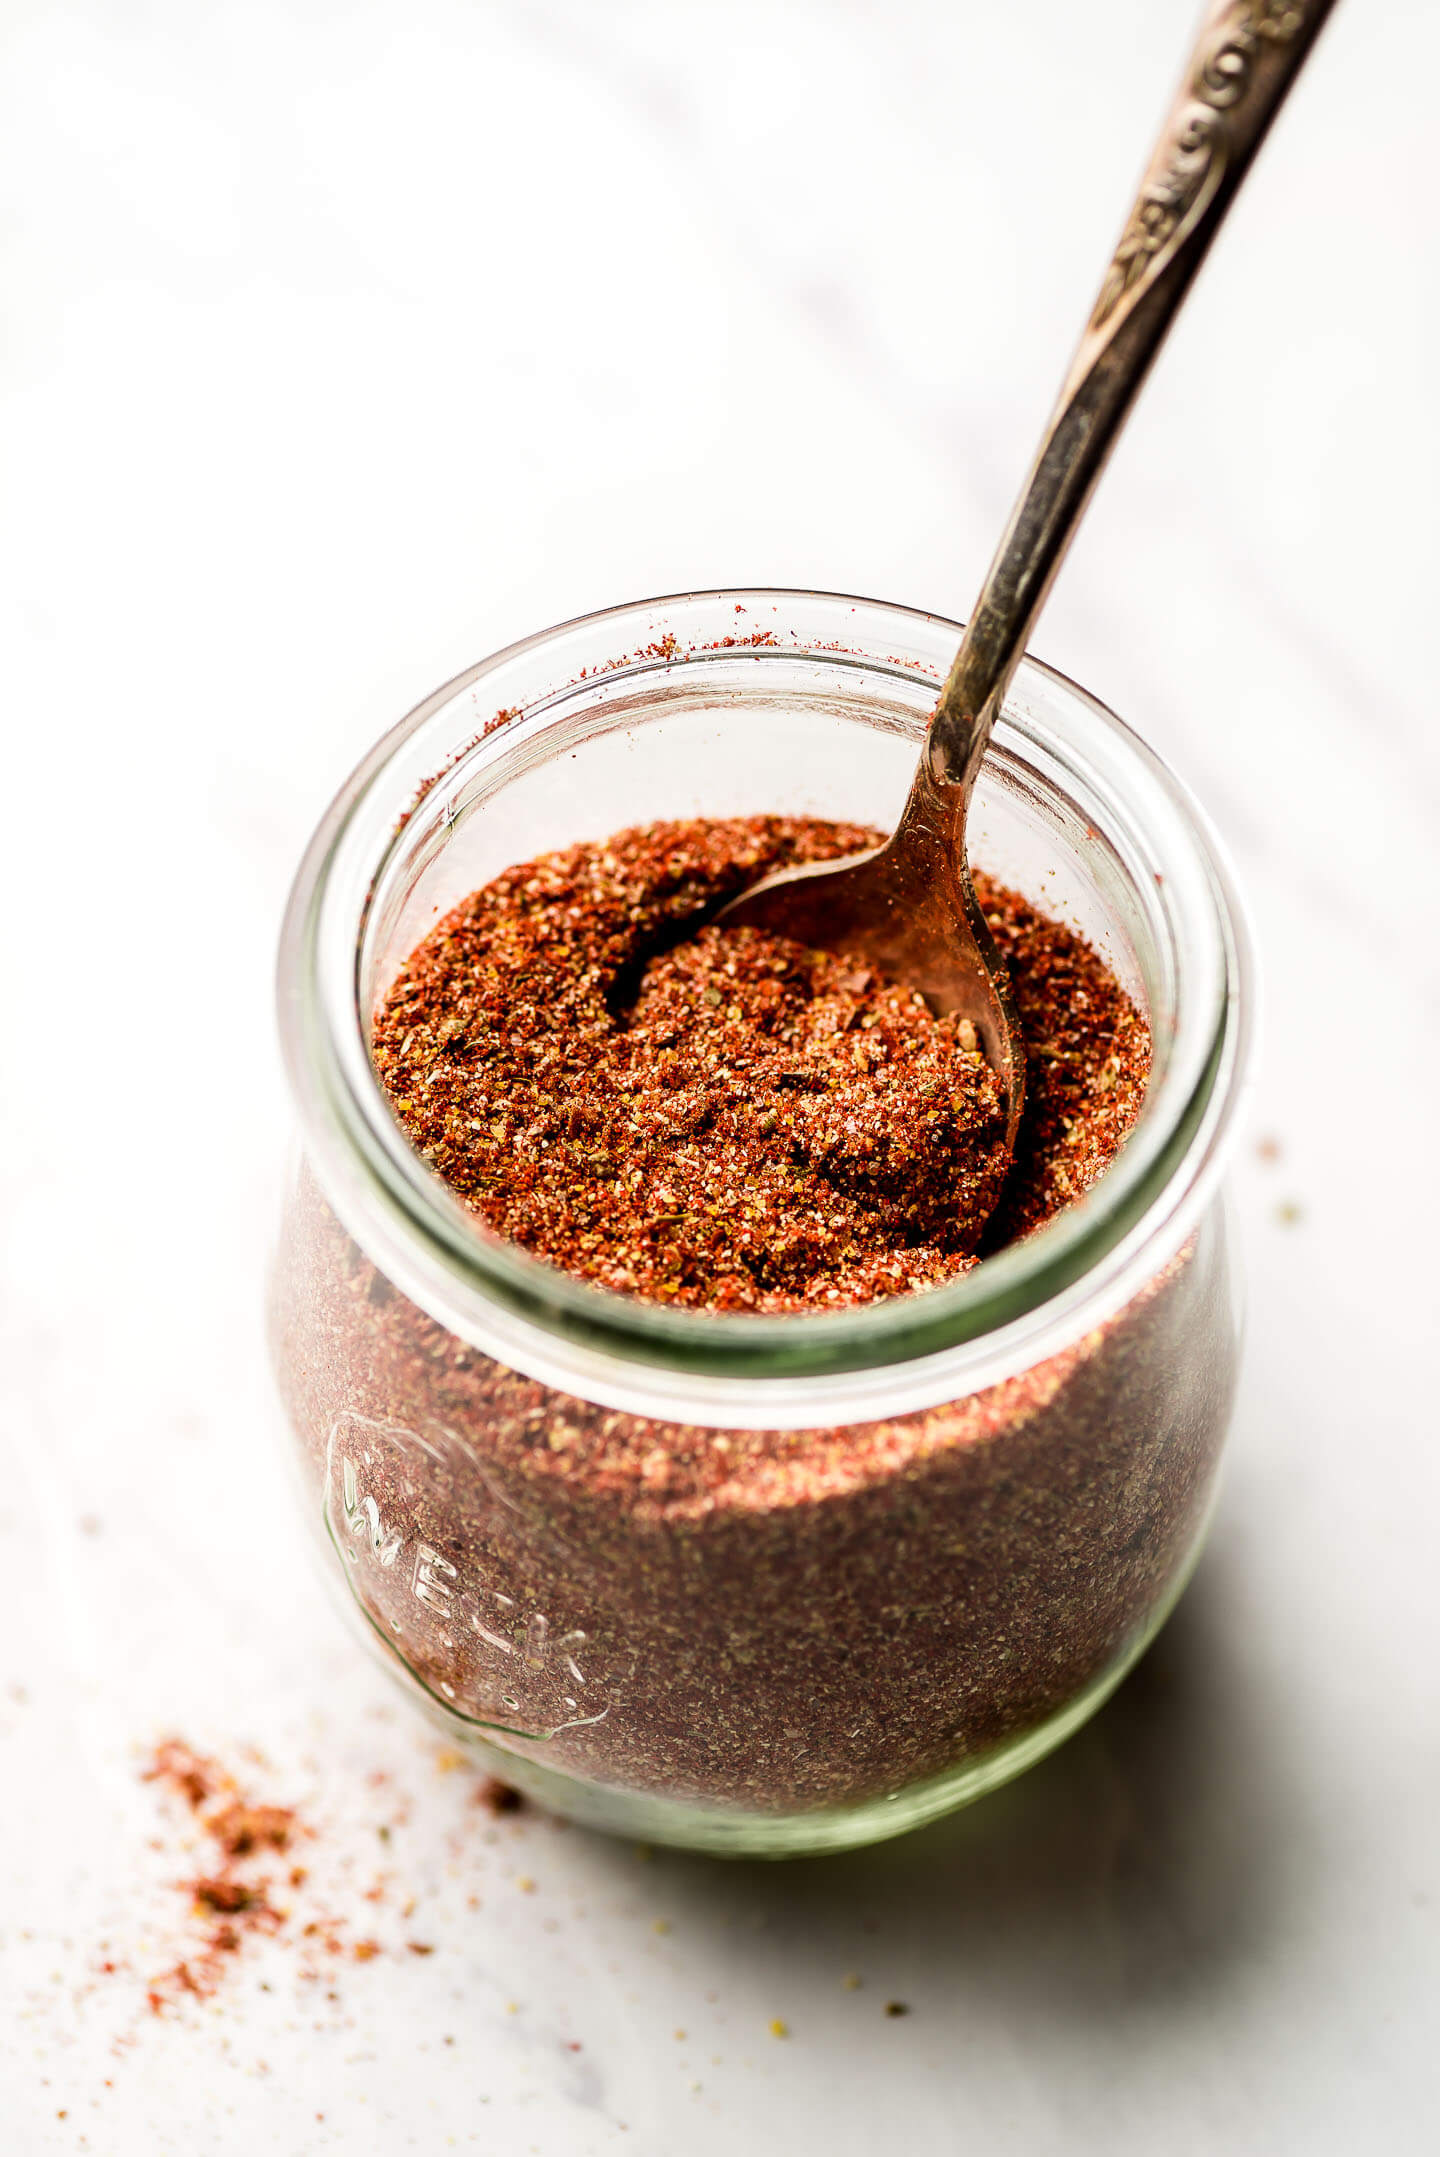 A jar of Homemade Taco Seasoning with a spoon in it.